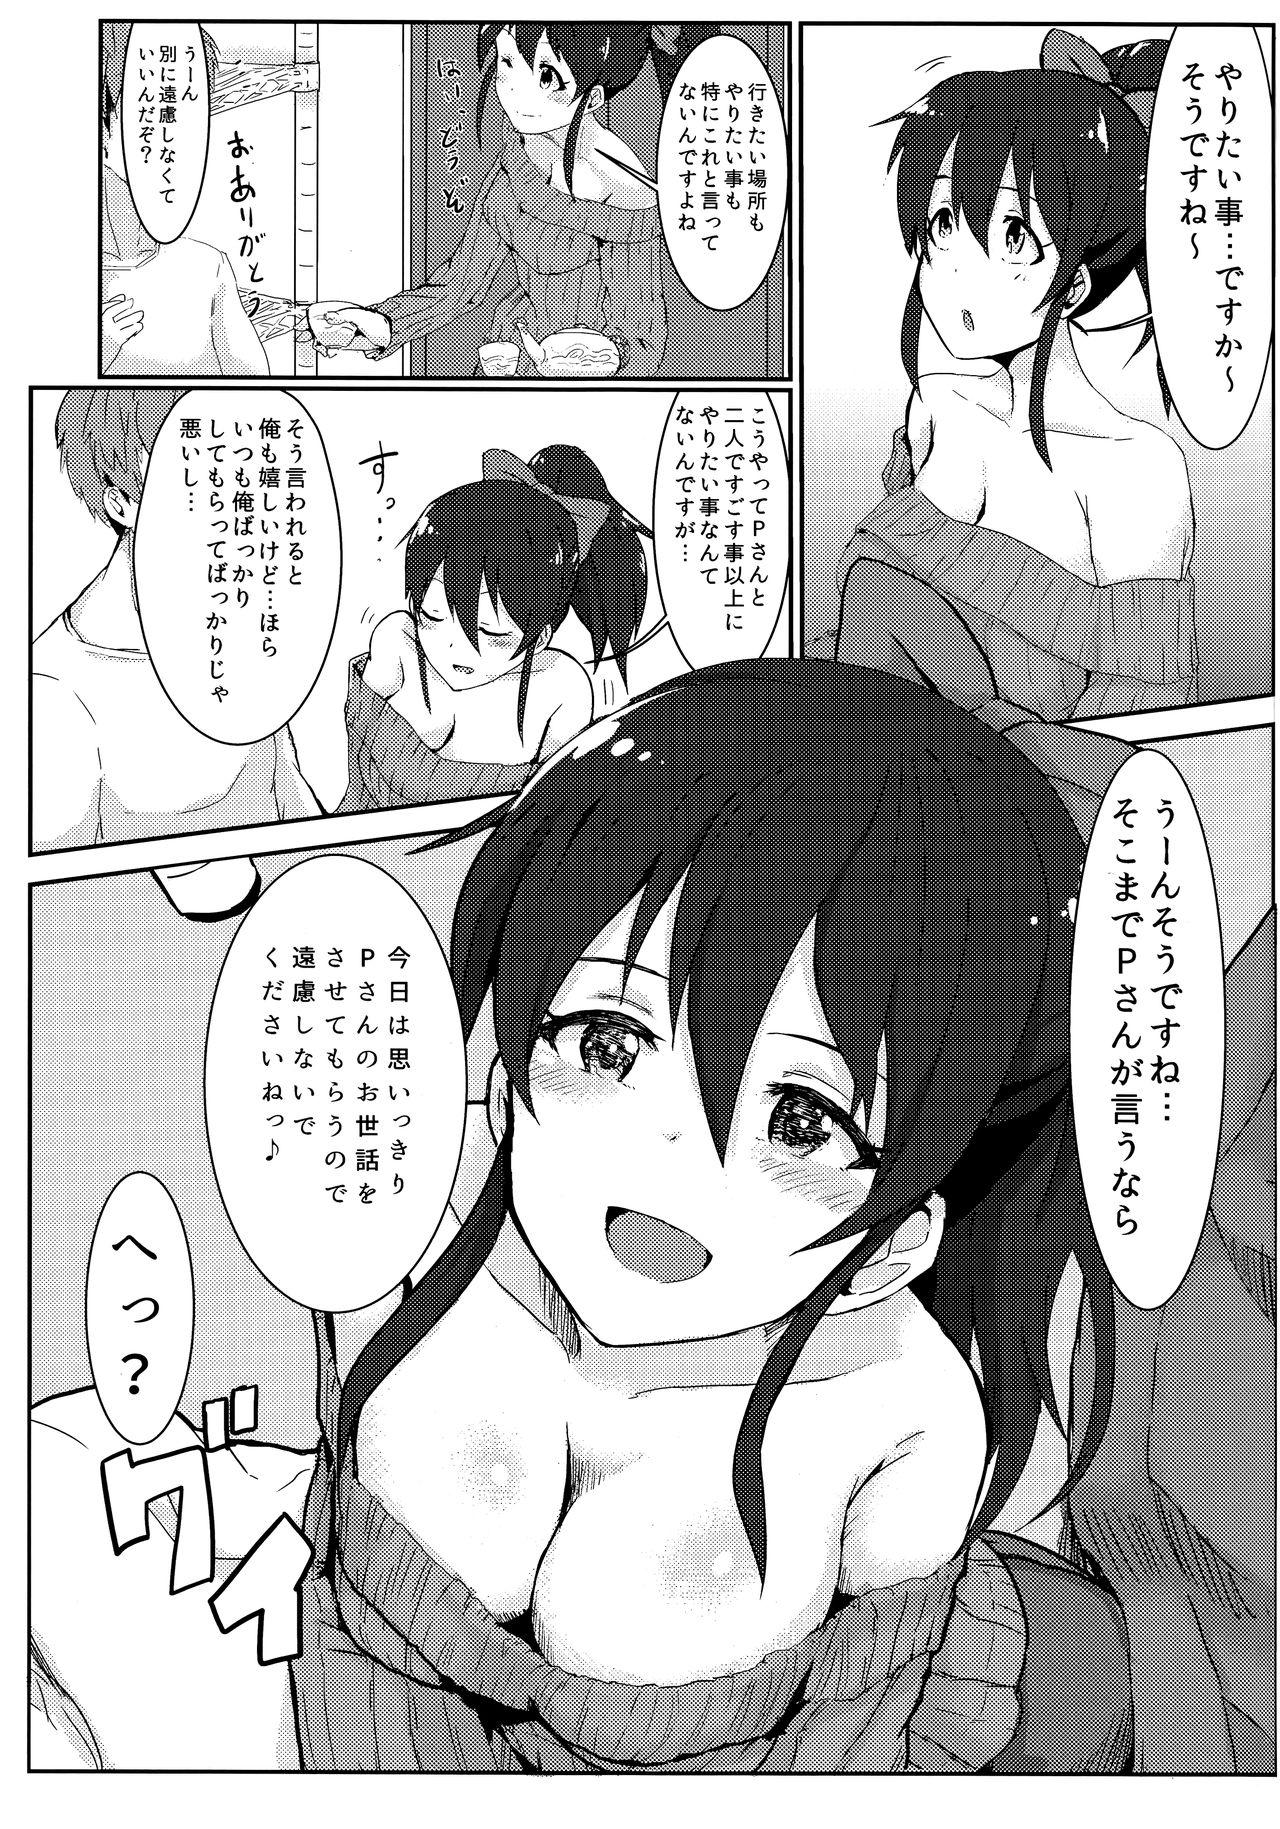 Passionate Zutto Issho ga Ii na - The idolmaster Public Nudity - Page 6